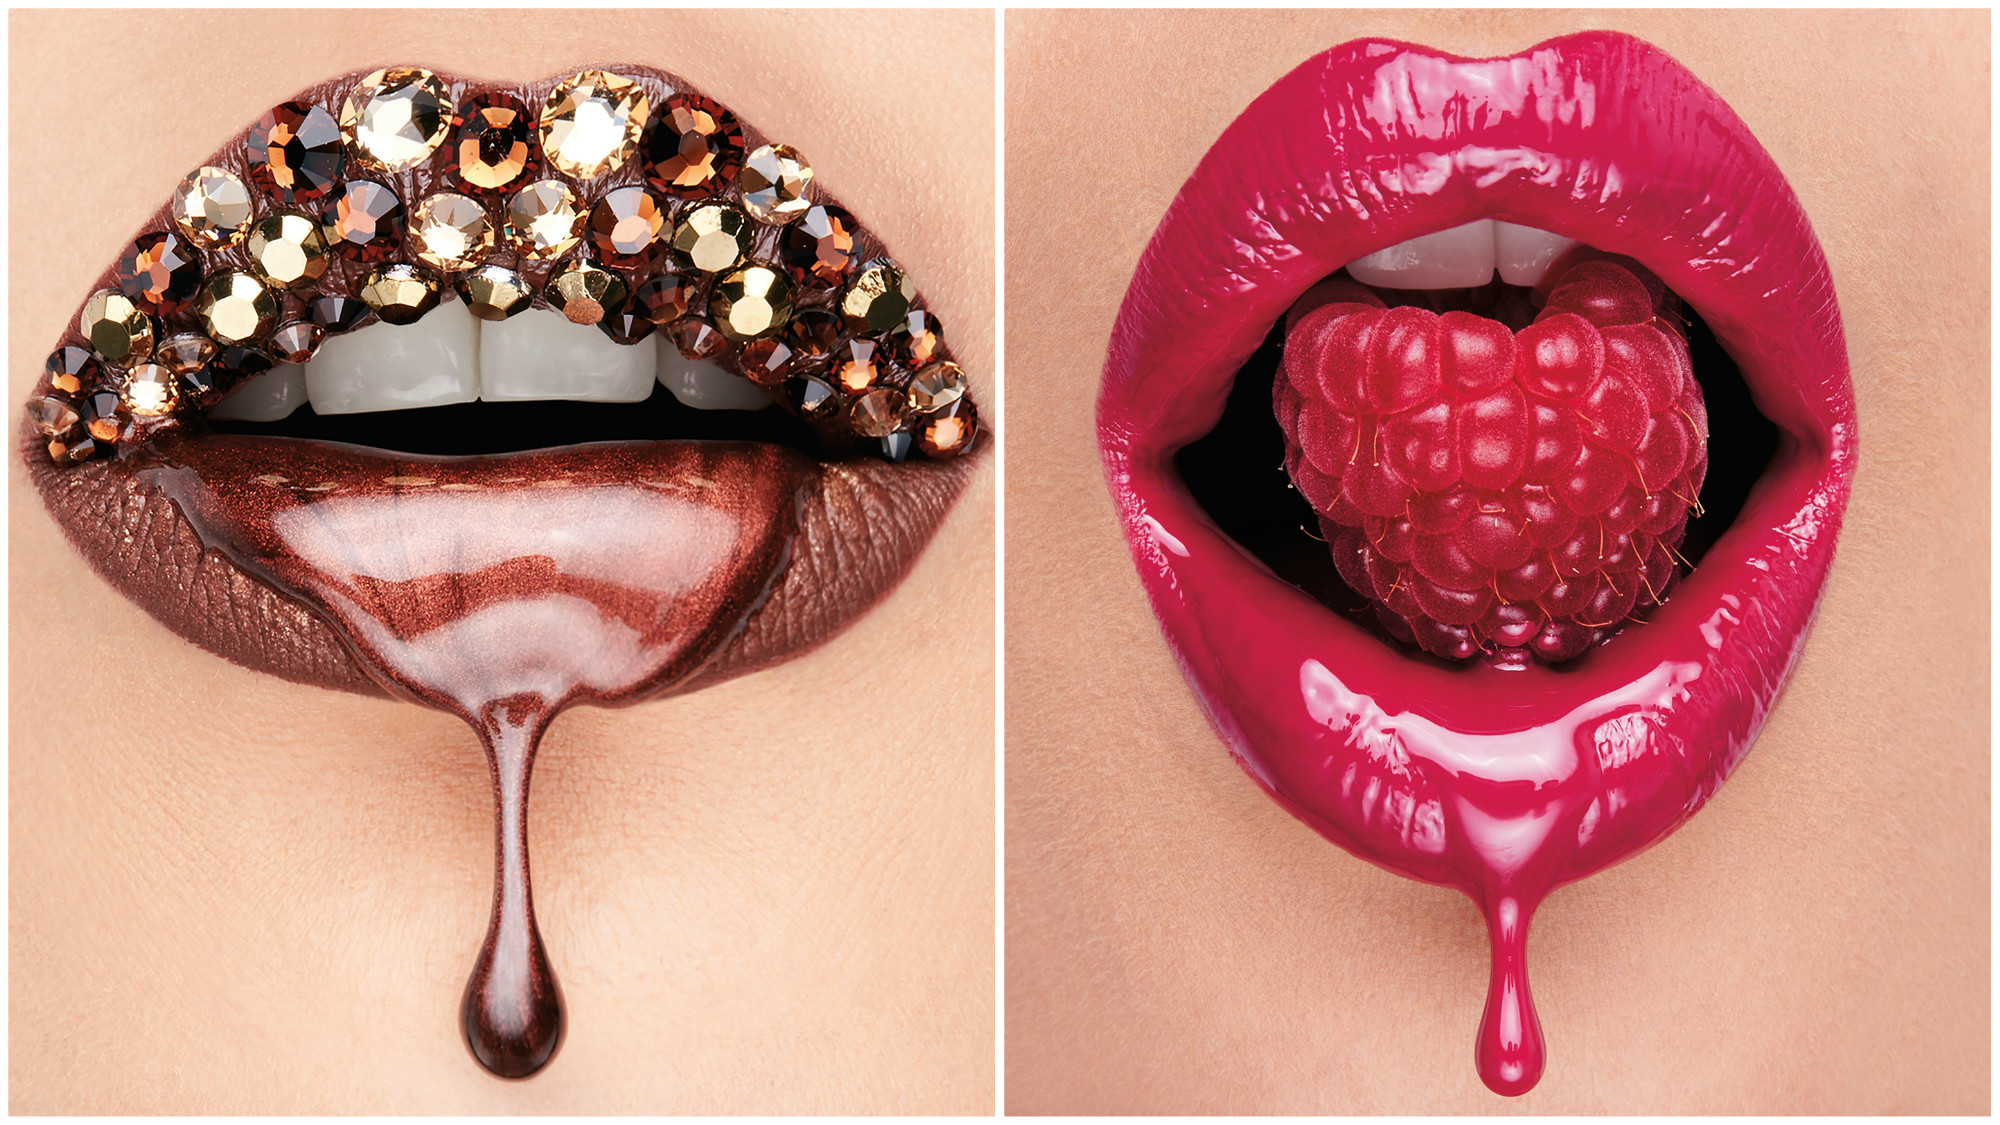 A look at lip art designs by makeup artist Vlada Haggerty, which are prominently displayed on her Instagram profile.